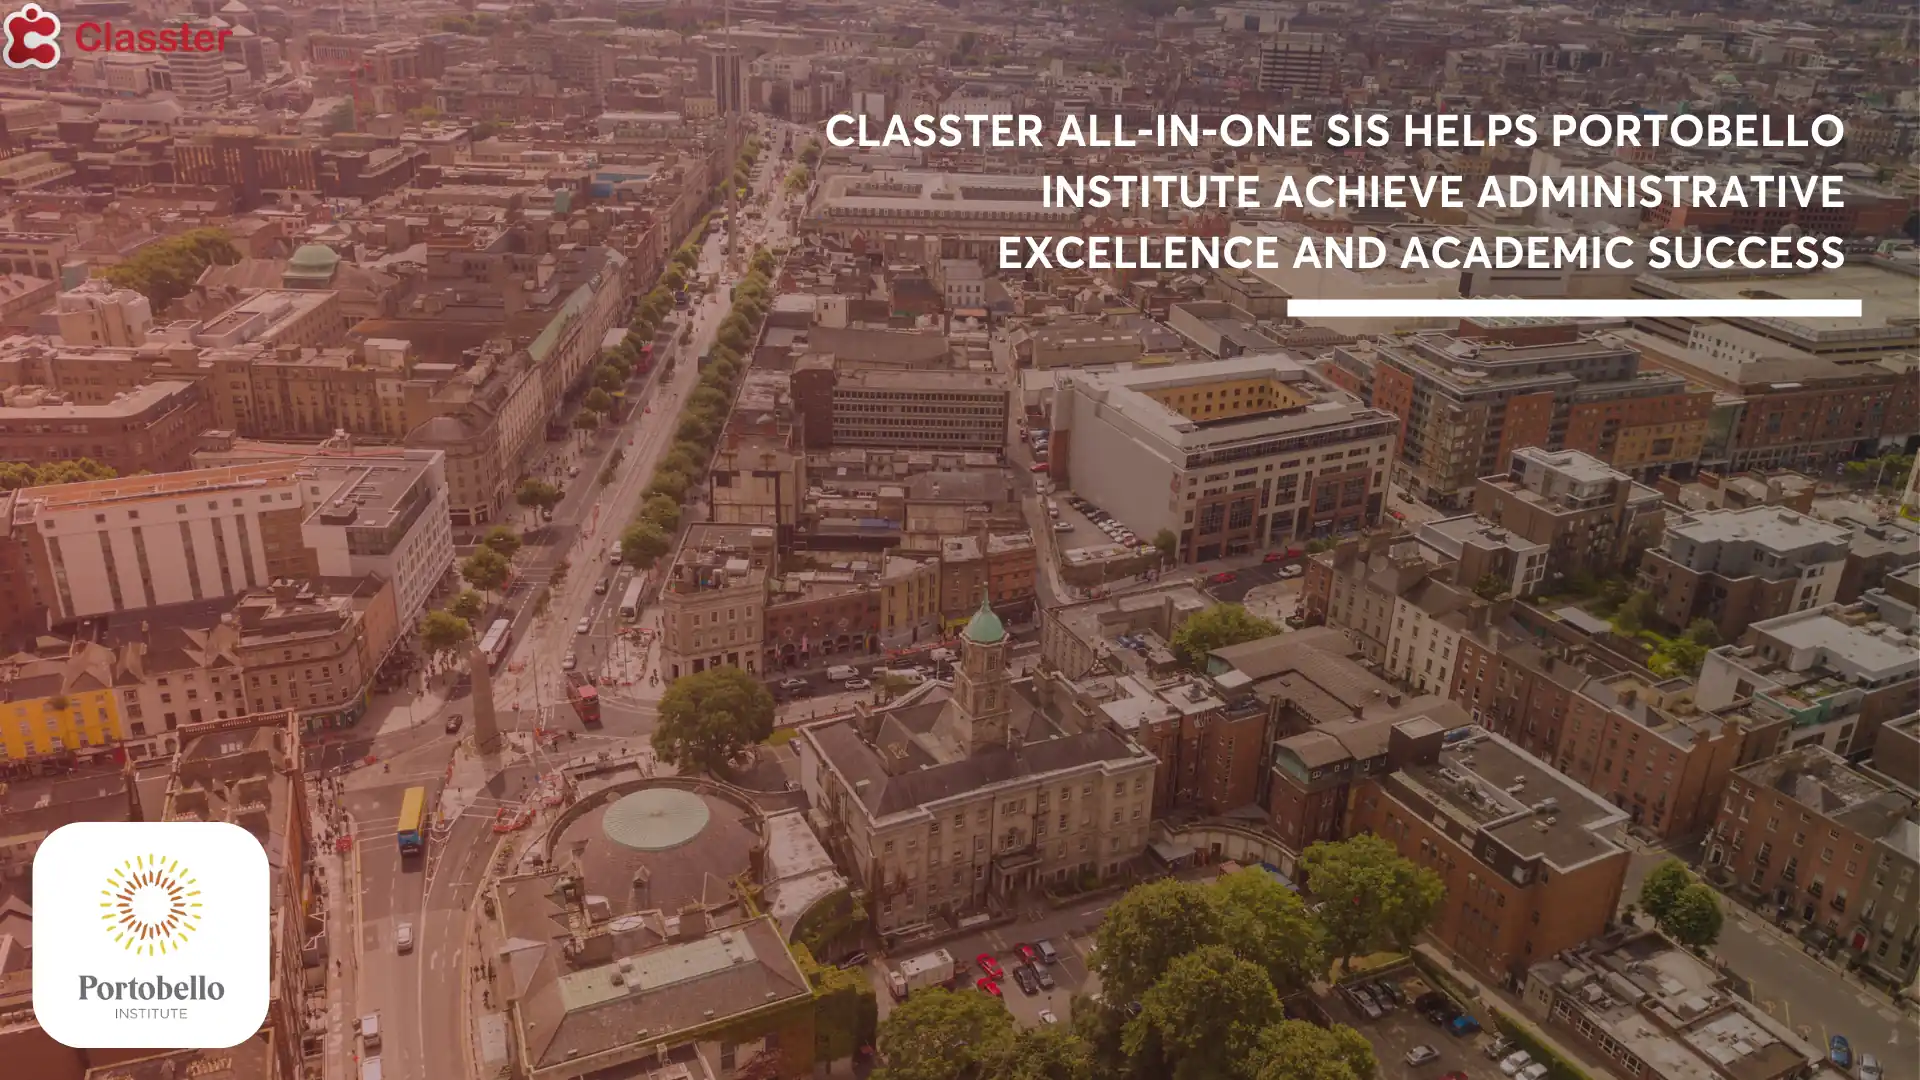 Classter All-In-One SIS Helps Portobello Institute Achieve Administrative Excellence and Academic Success